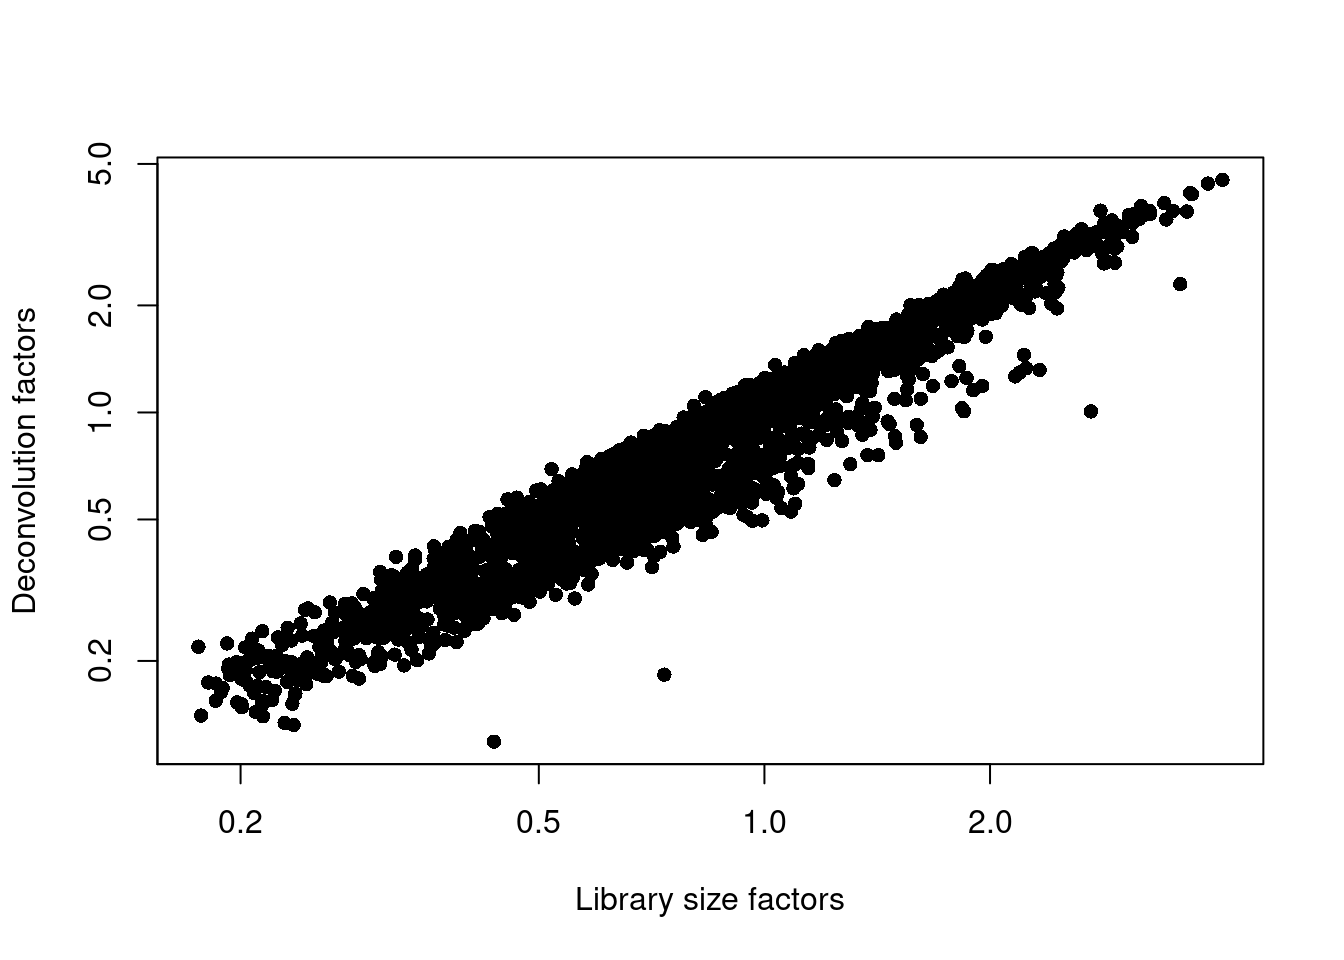 Relationship between the library size factors and the deconvolution size factors in the Zeisel brain dataset.